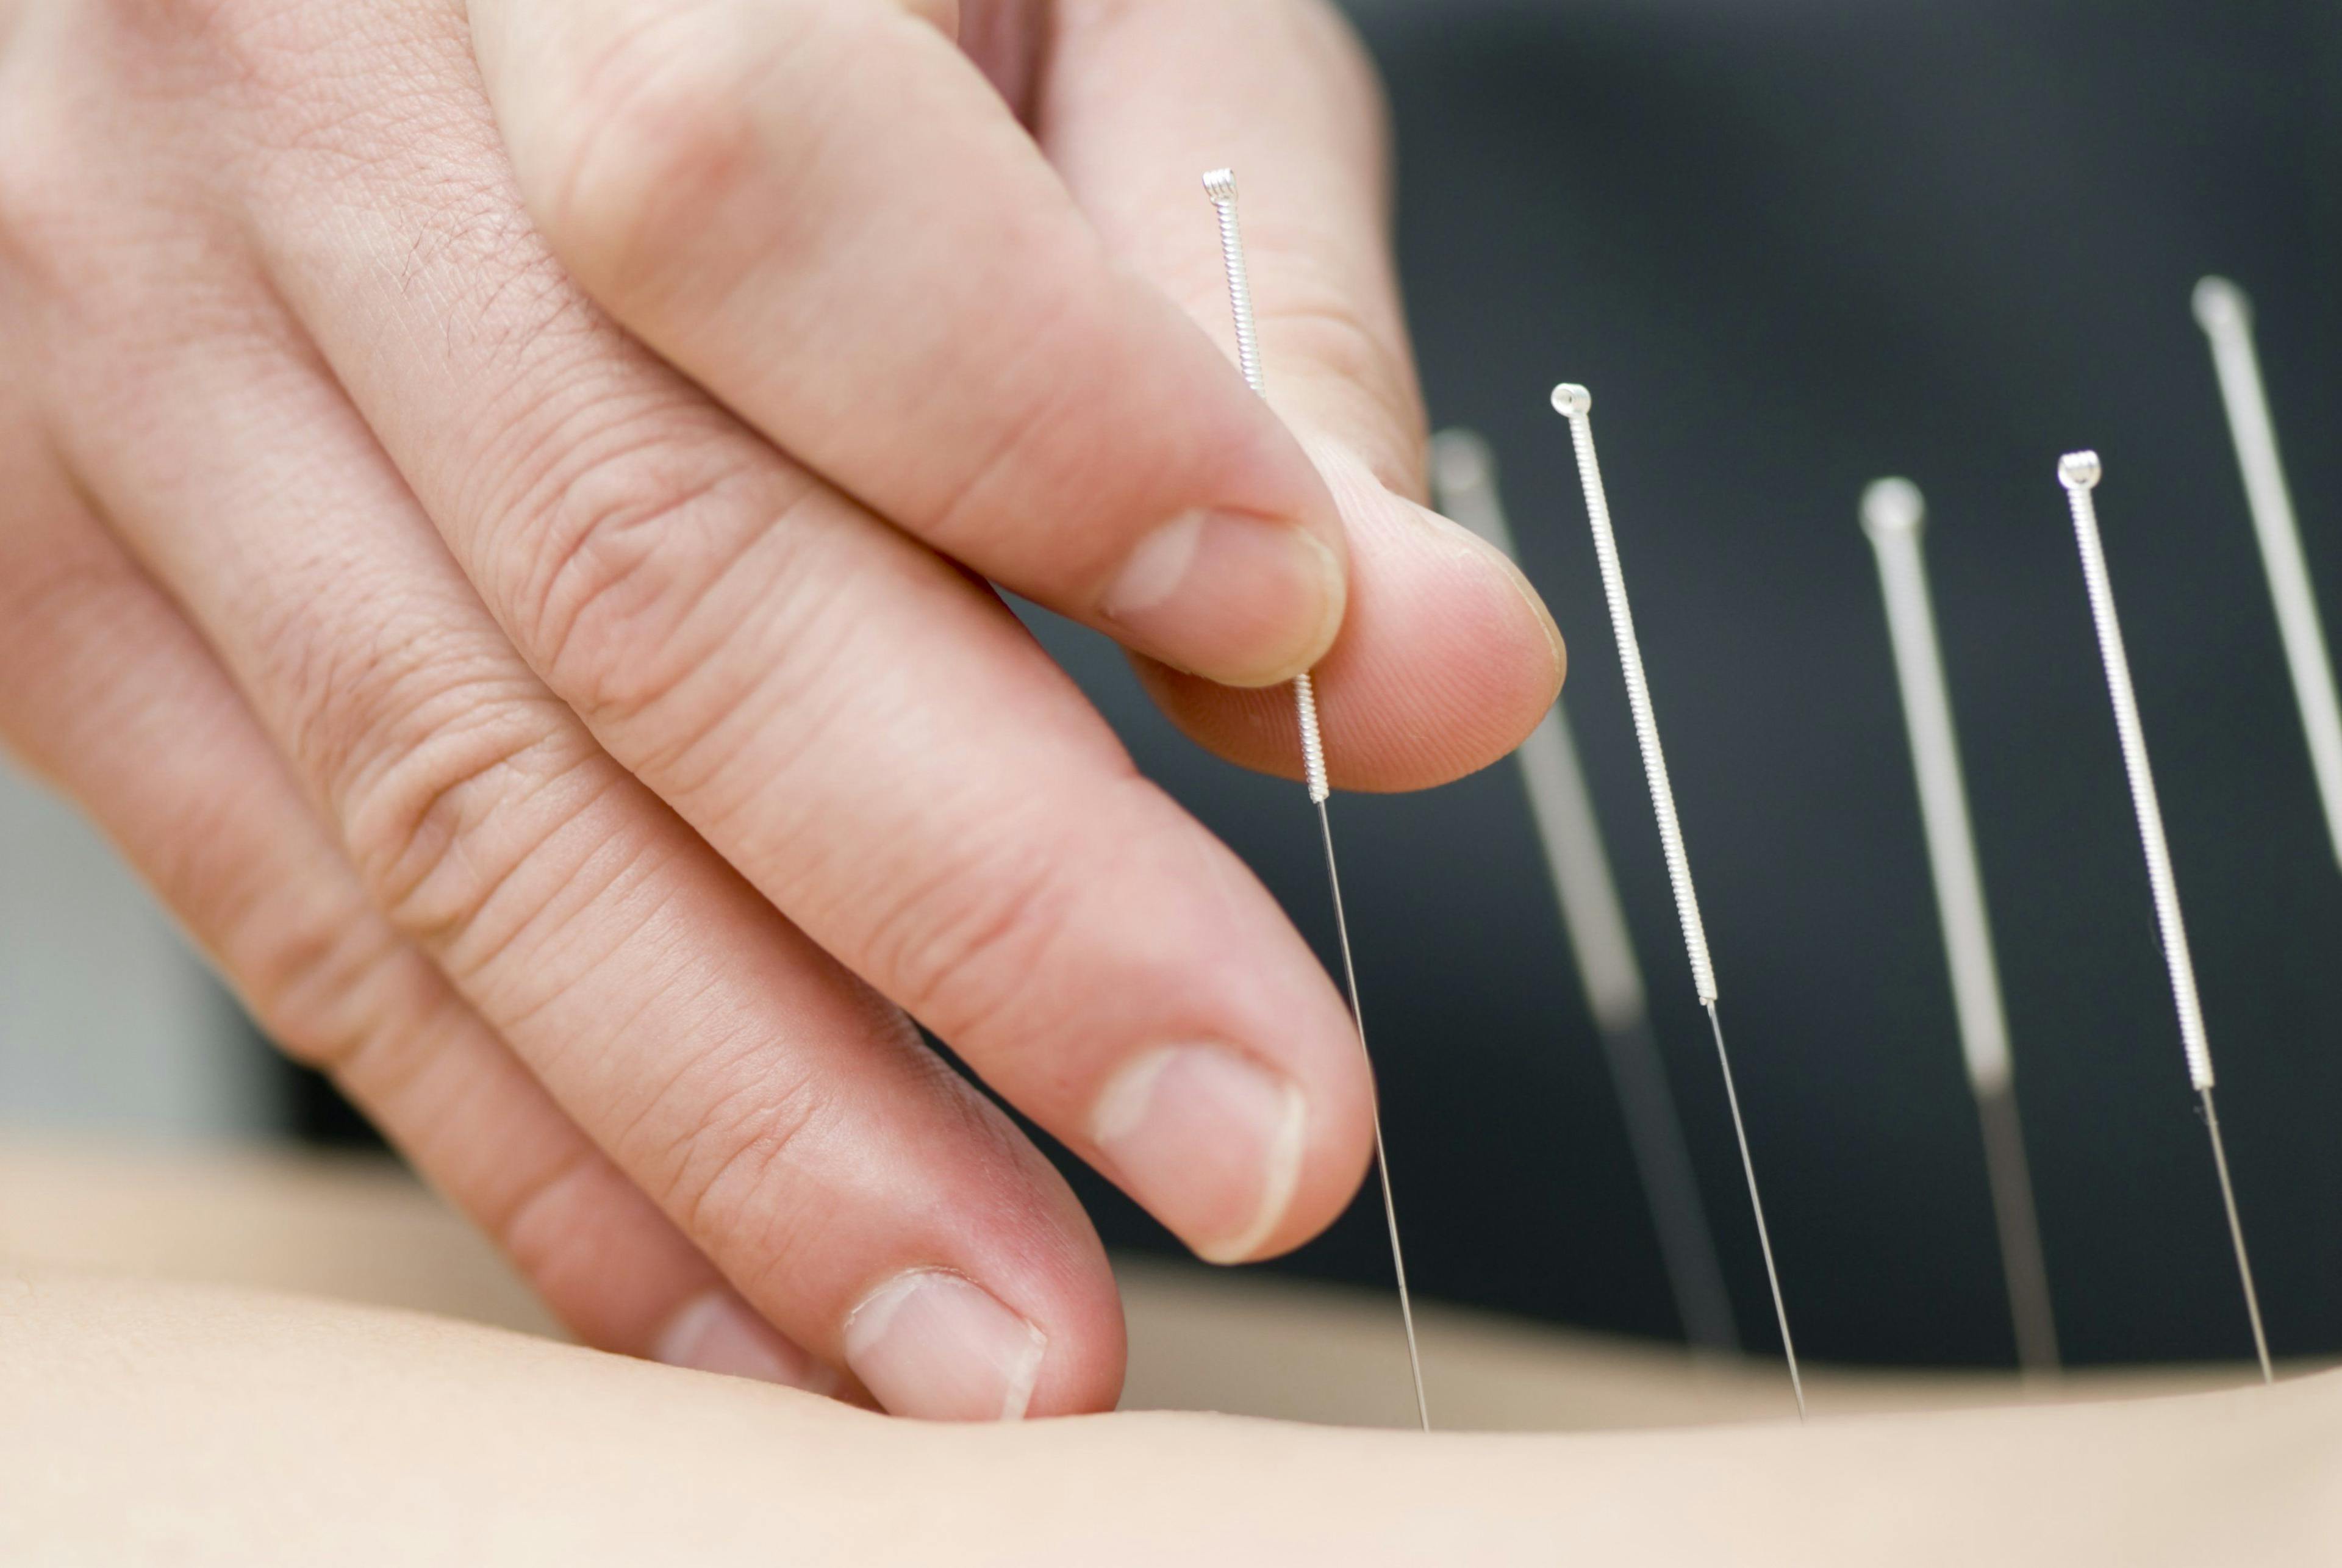 Medicare to cover acupuncture for chronic lower back pain